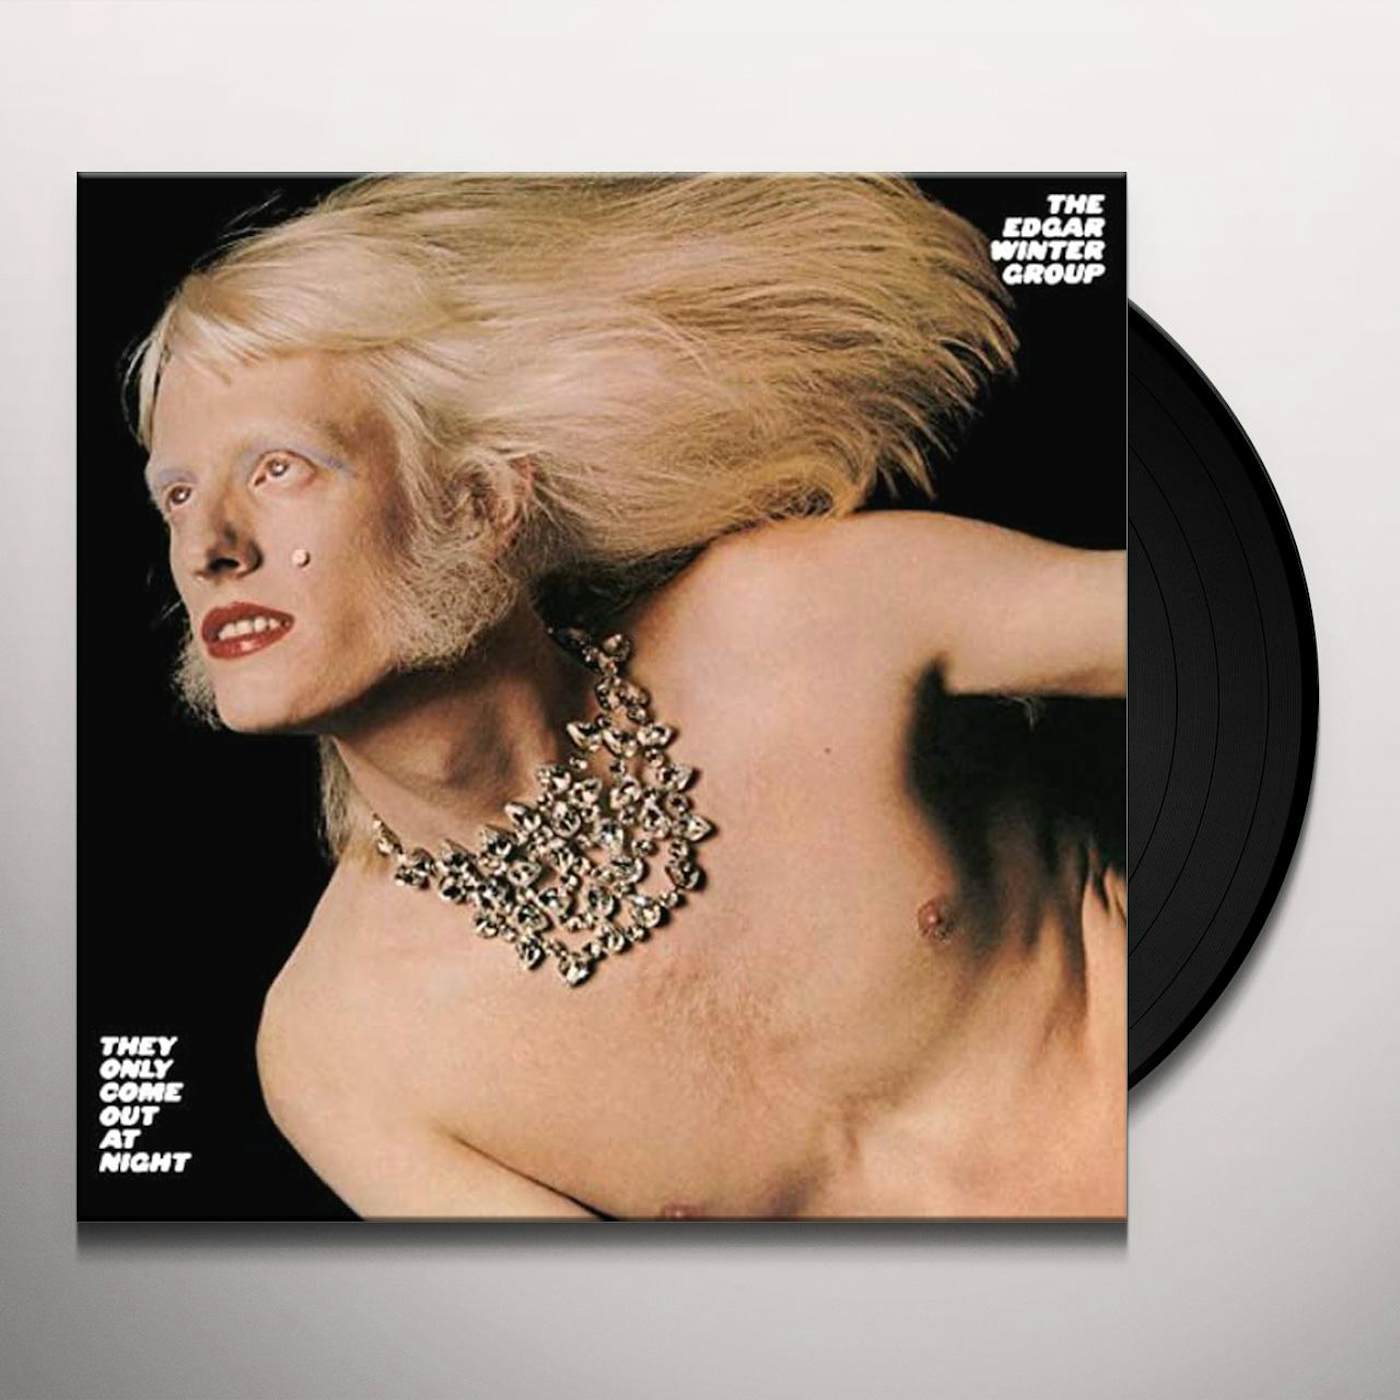 Edgar Winter THEY ONLY COME OUT AT NIGHT (180G) Vinyl Record